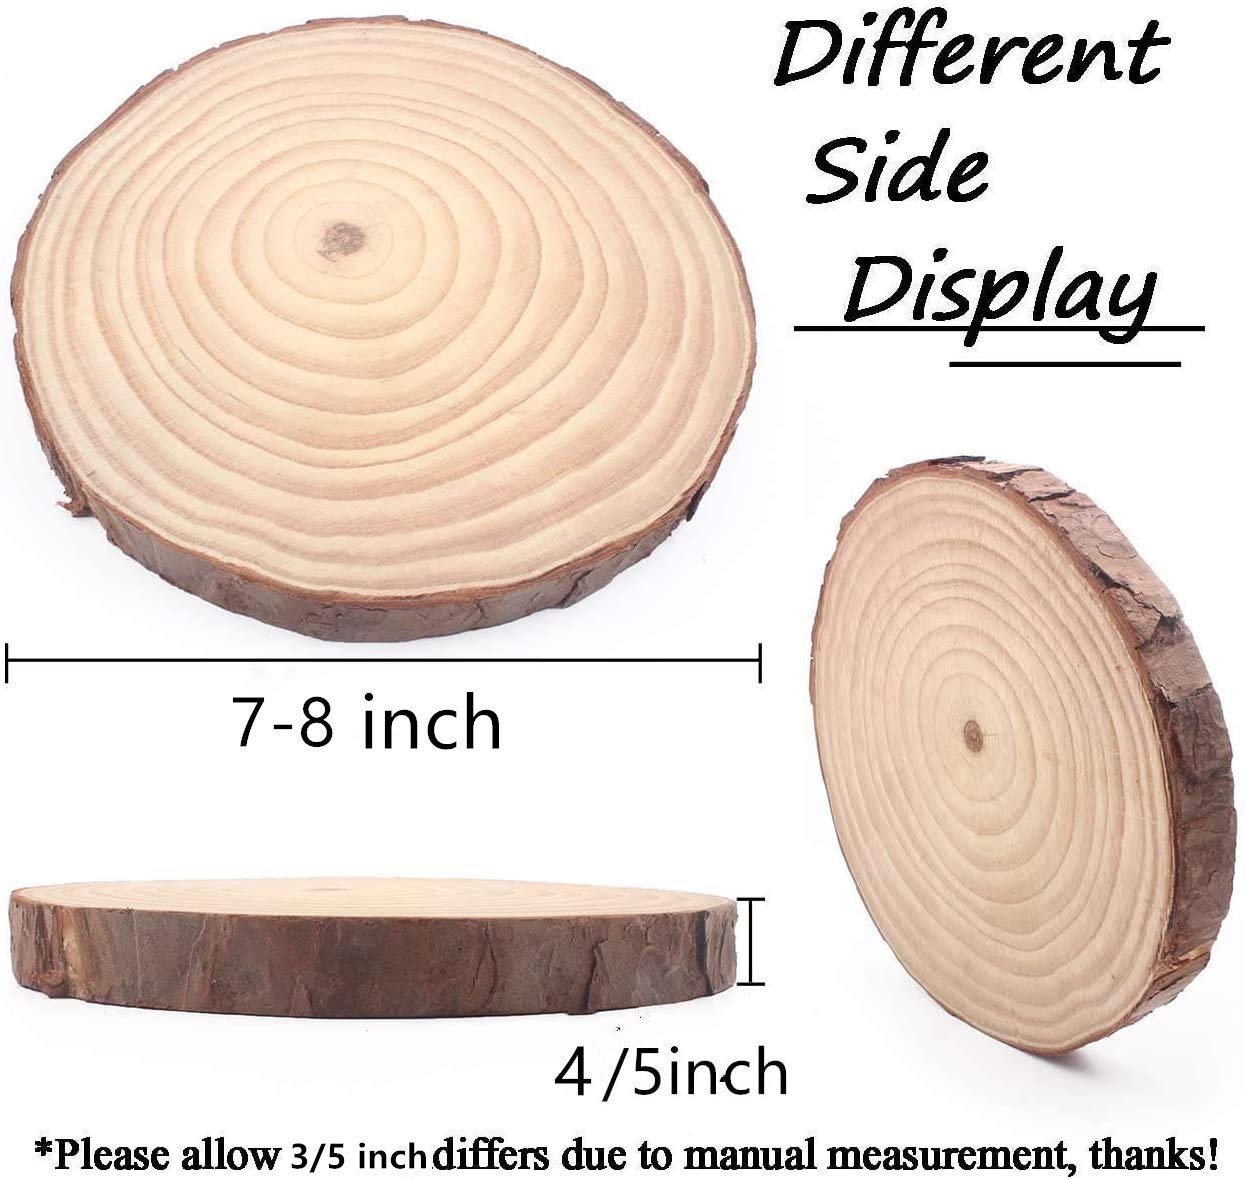 MAOM Natural Wood Slices 15 Pcs 4-4.7 Round Wood Discs Tree Bark Wooden  Circles for DIY Crafting Coasters Arts Crafts Home Decorations Vintage